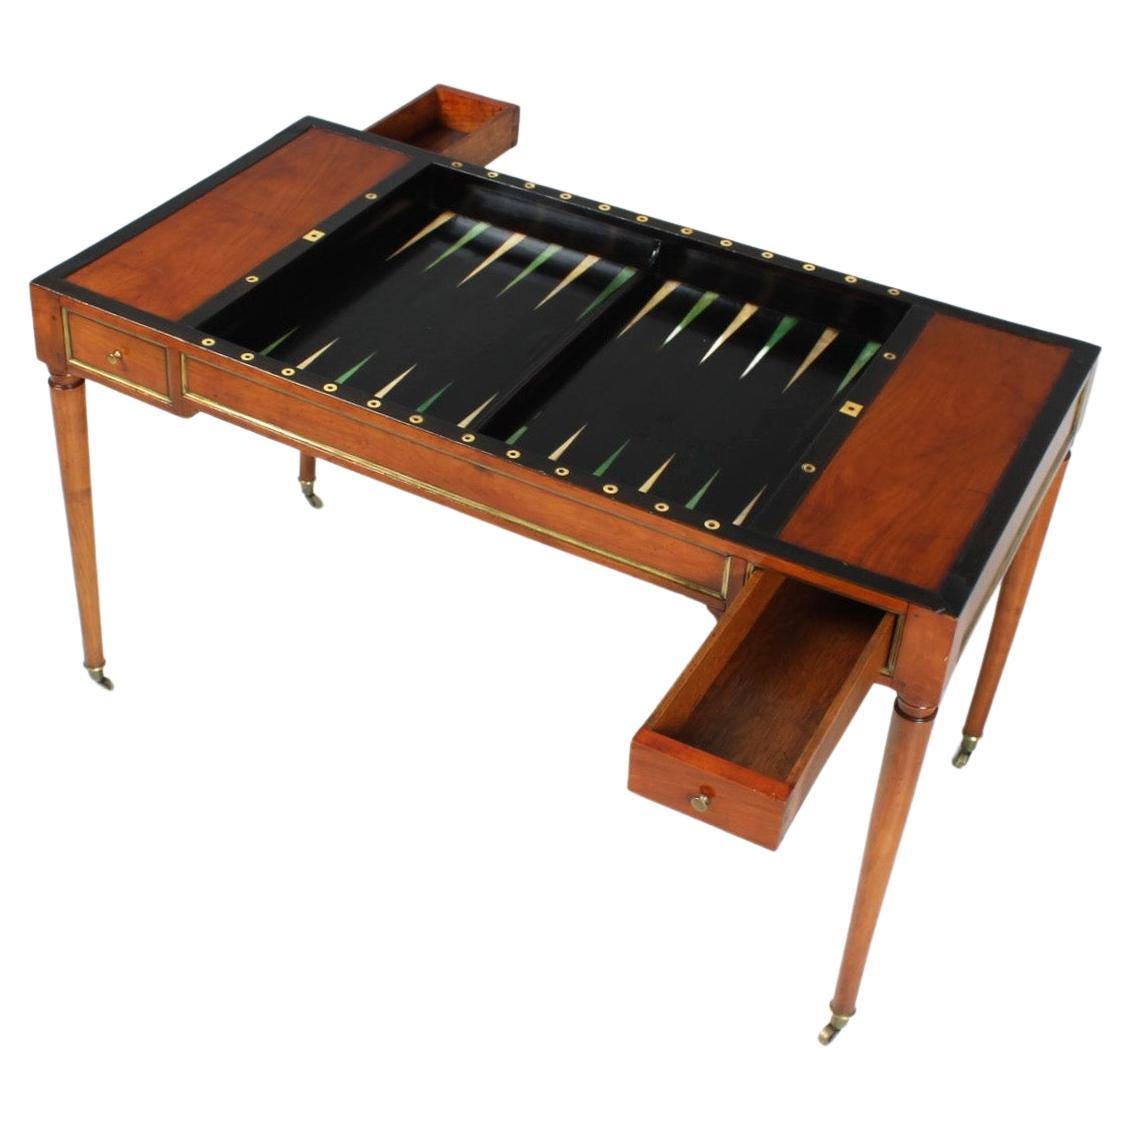 Antique Backgammon Table, so-called Tric Trac Table, Cherry, France, Louis XVI